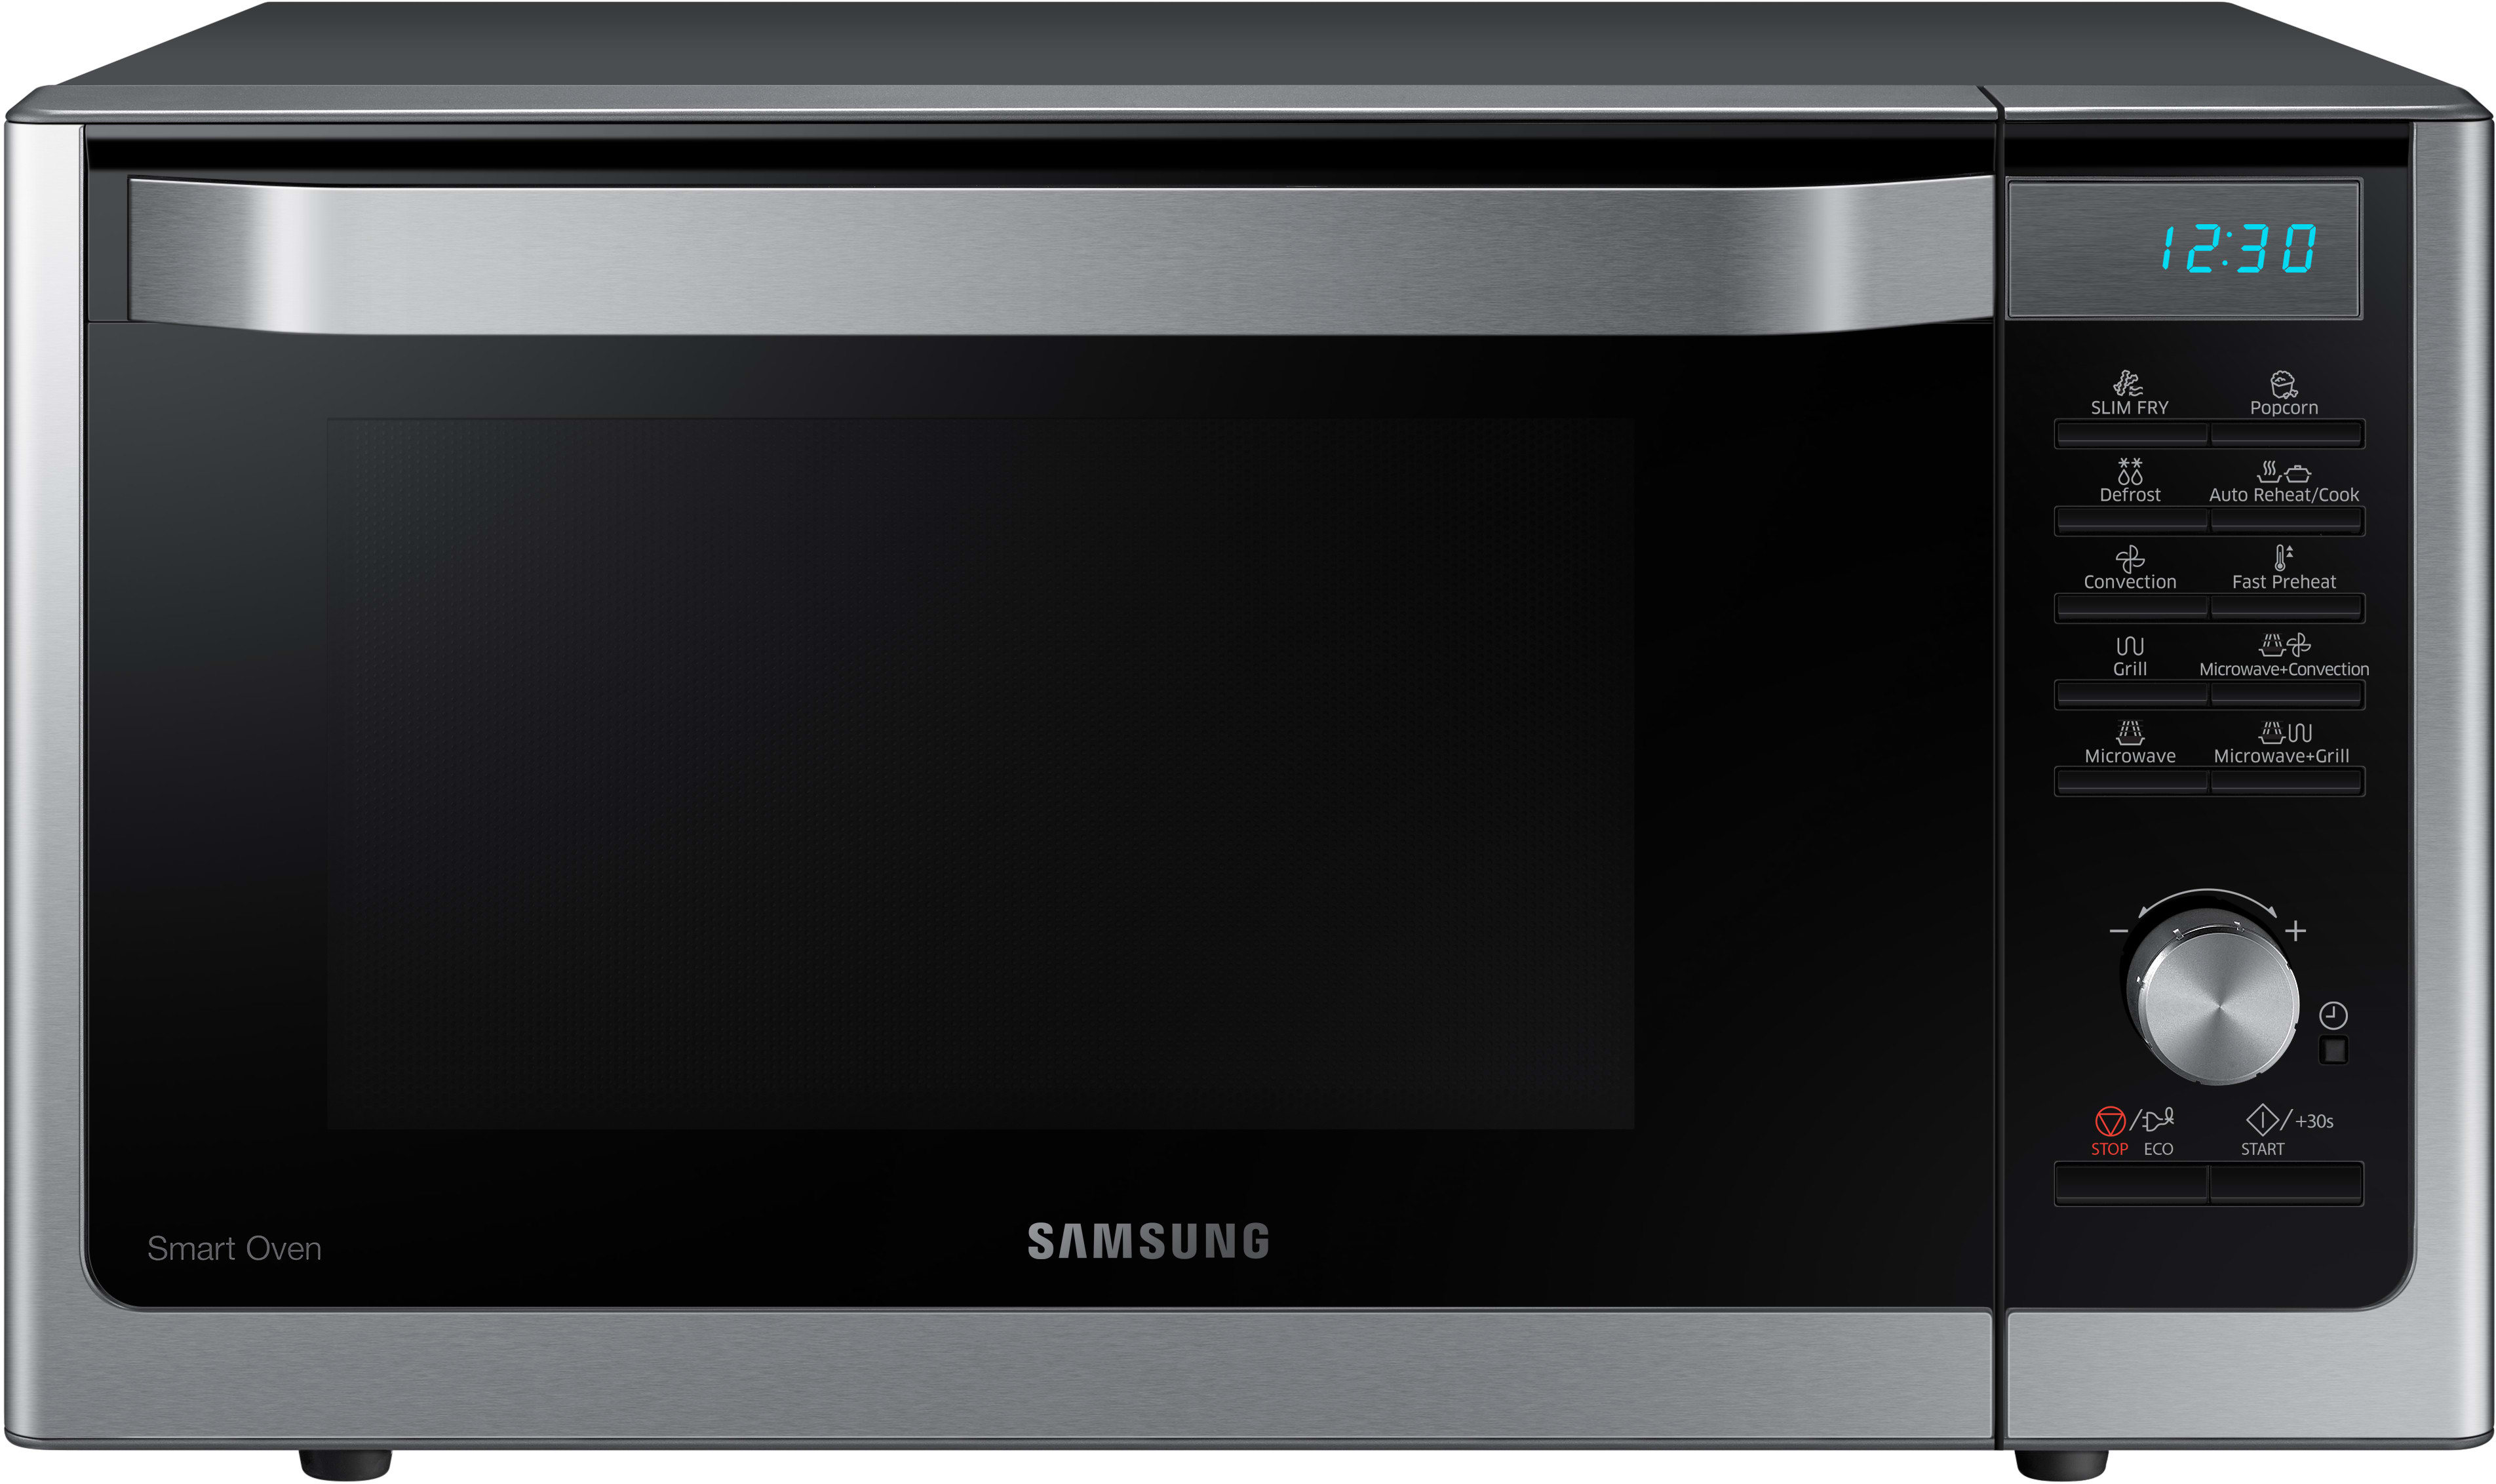 Samsung MC11H6033CT Countertop Microwave Oven with 1.1 cu. ft. Capacity